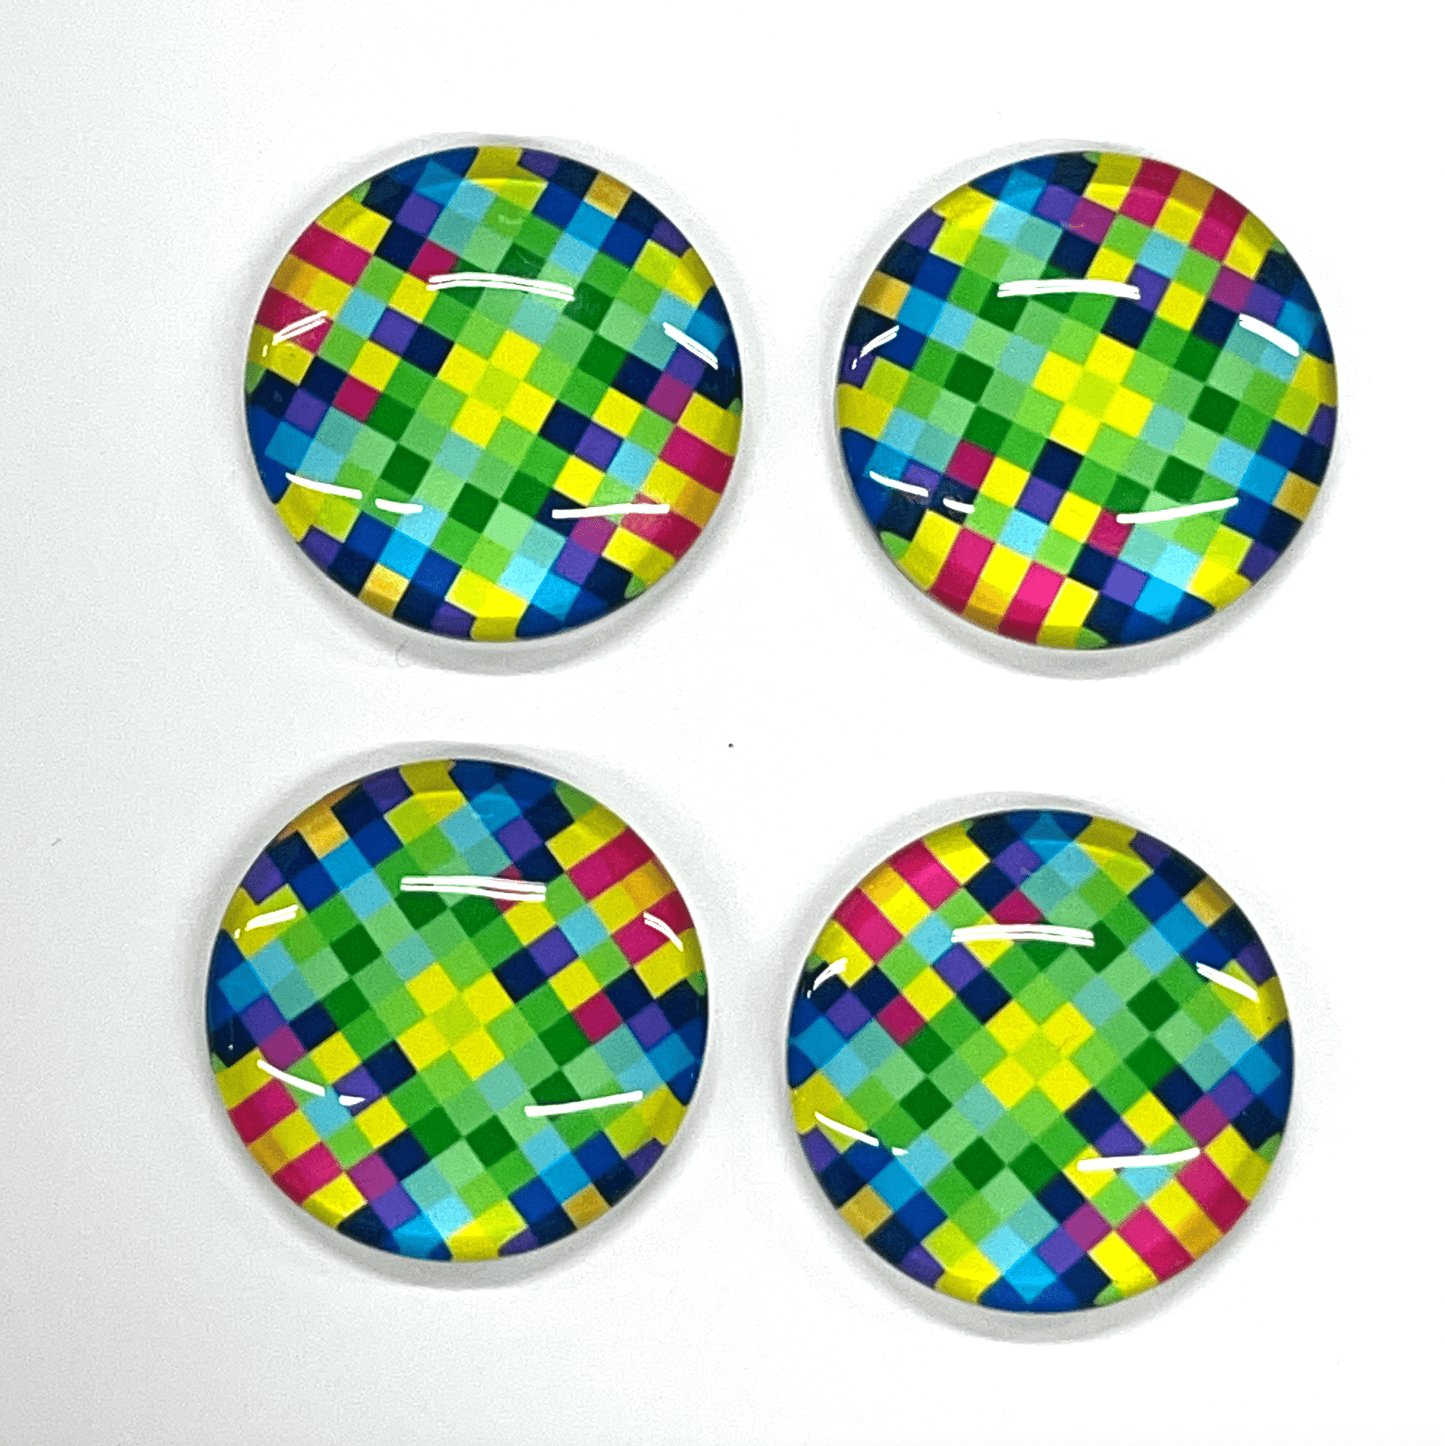 Sundaylace Creations & Bling Resin Gems 25mm "Minecraft" on Geometric pattern background round, Glue on, Acrylic Printed Resin Gem (Sold in Pair)